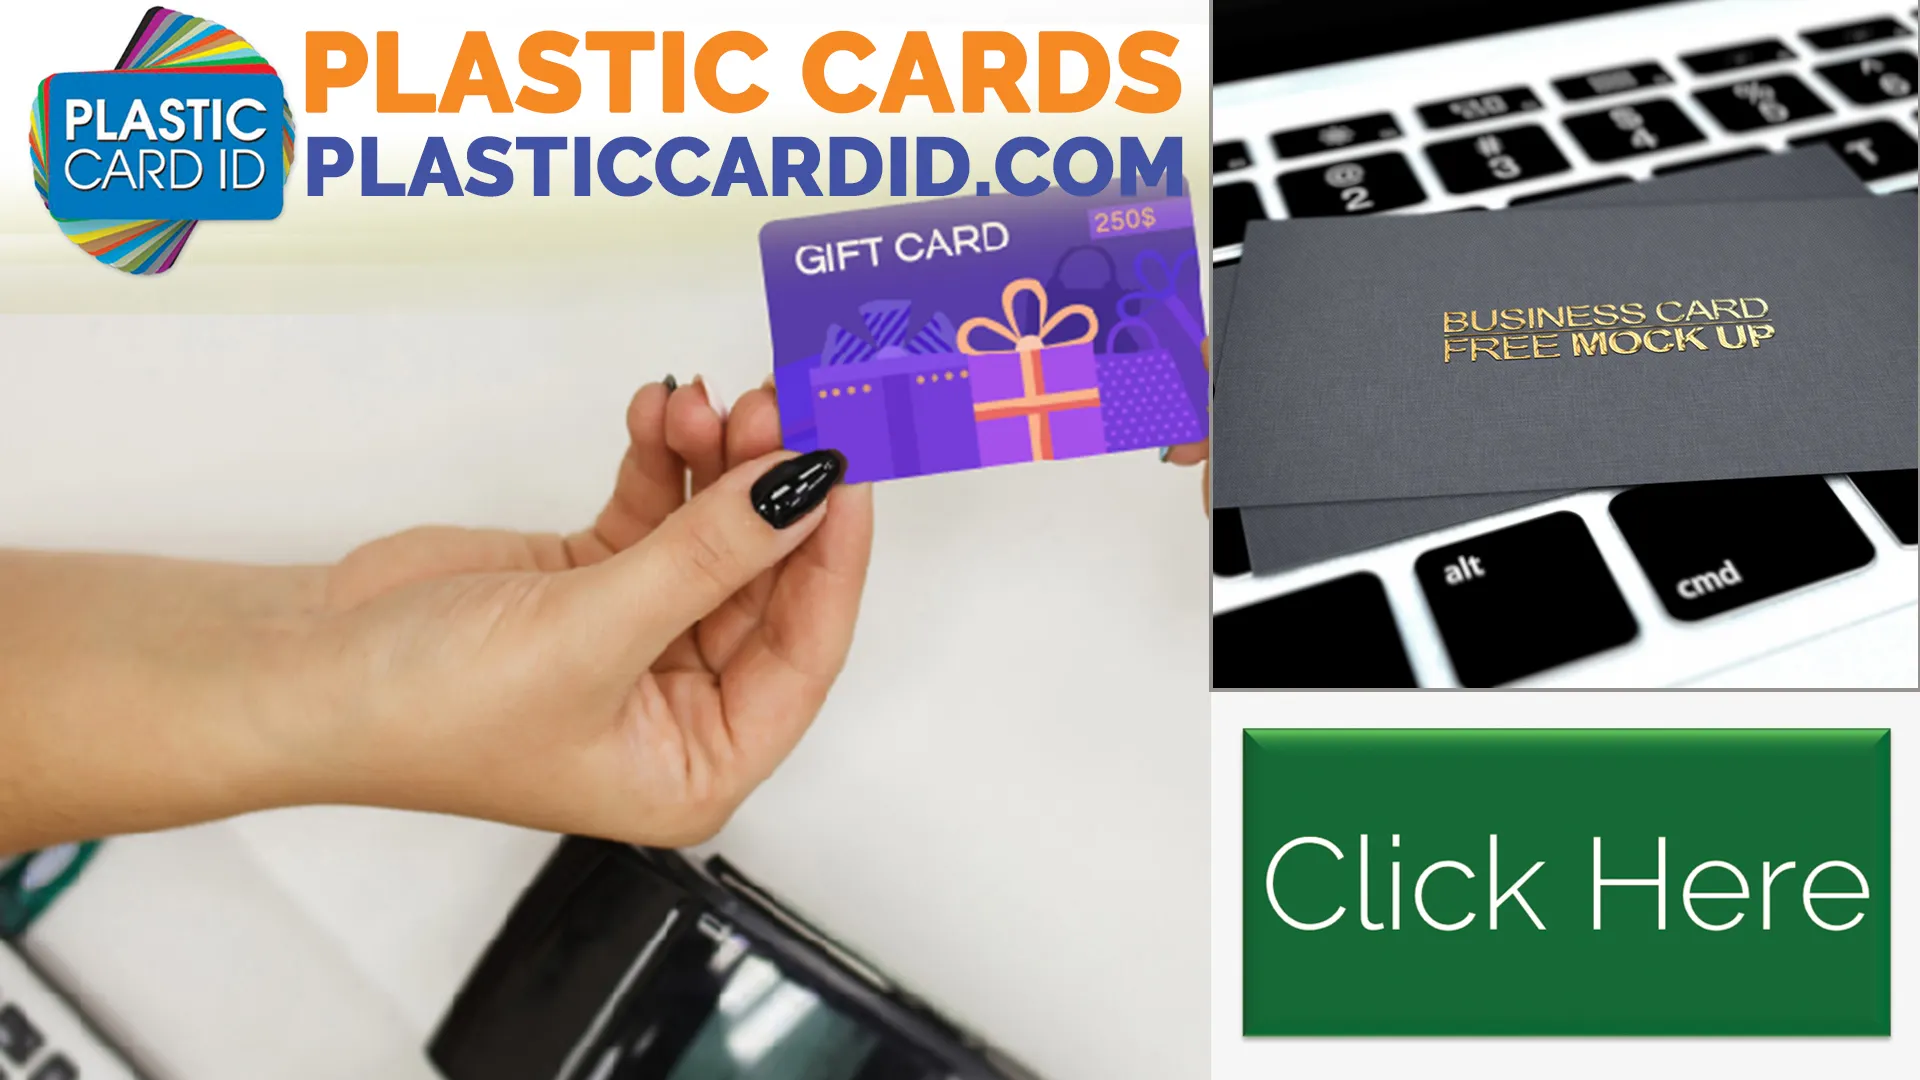 Discover the Variety of Plastic Cards We Provide